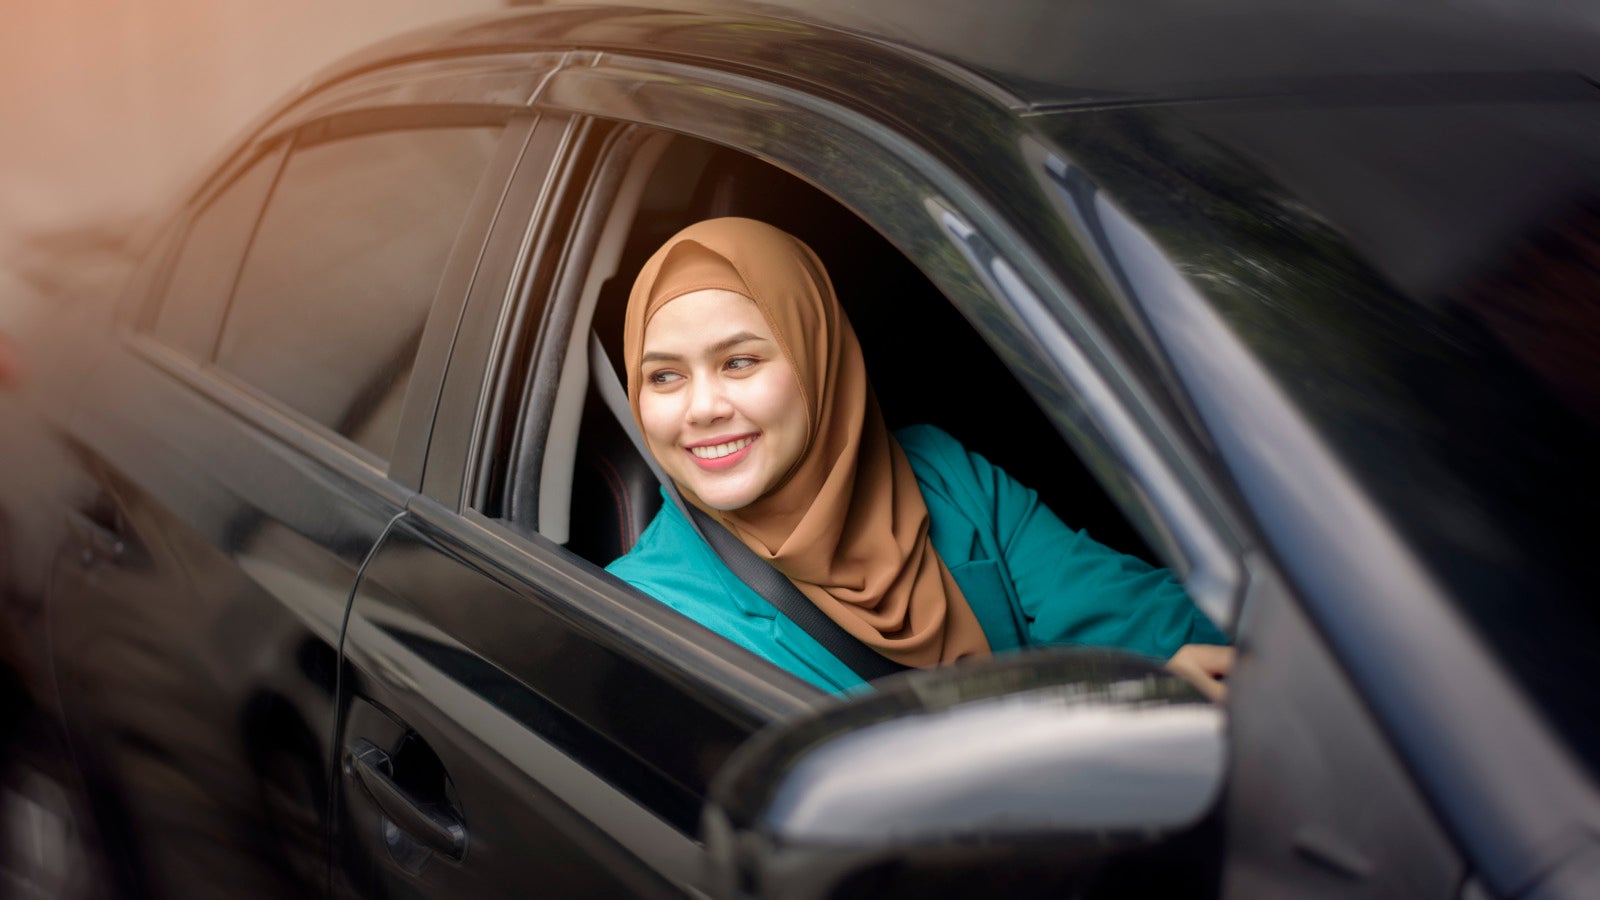 vecteezy beautiful businesswoman with hijab is smiling in her car 208